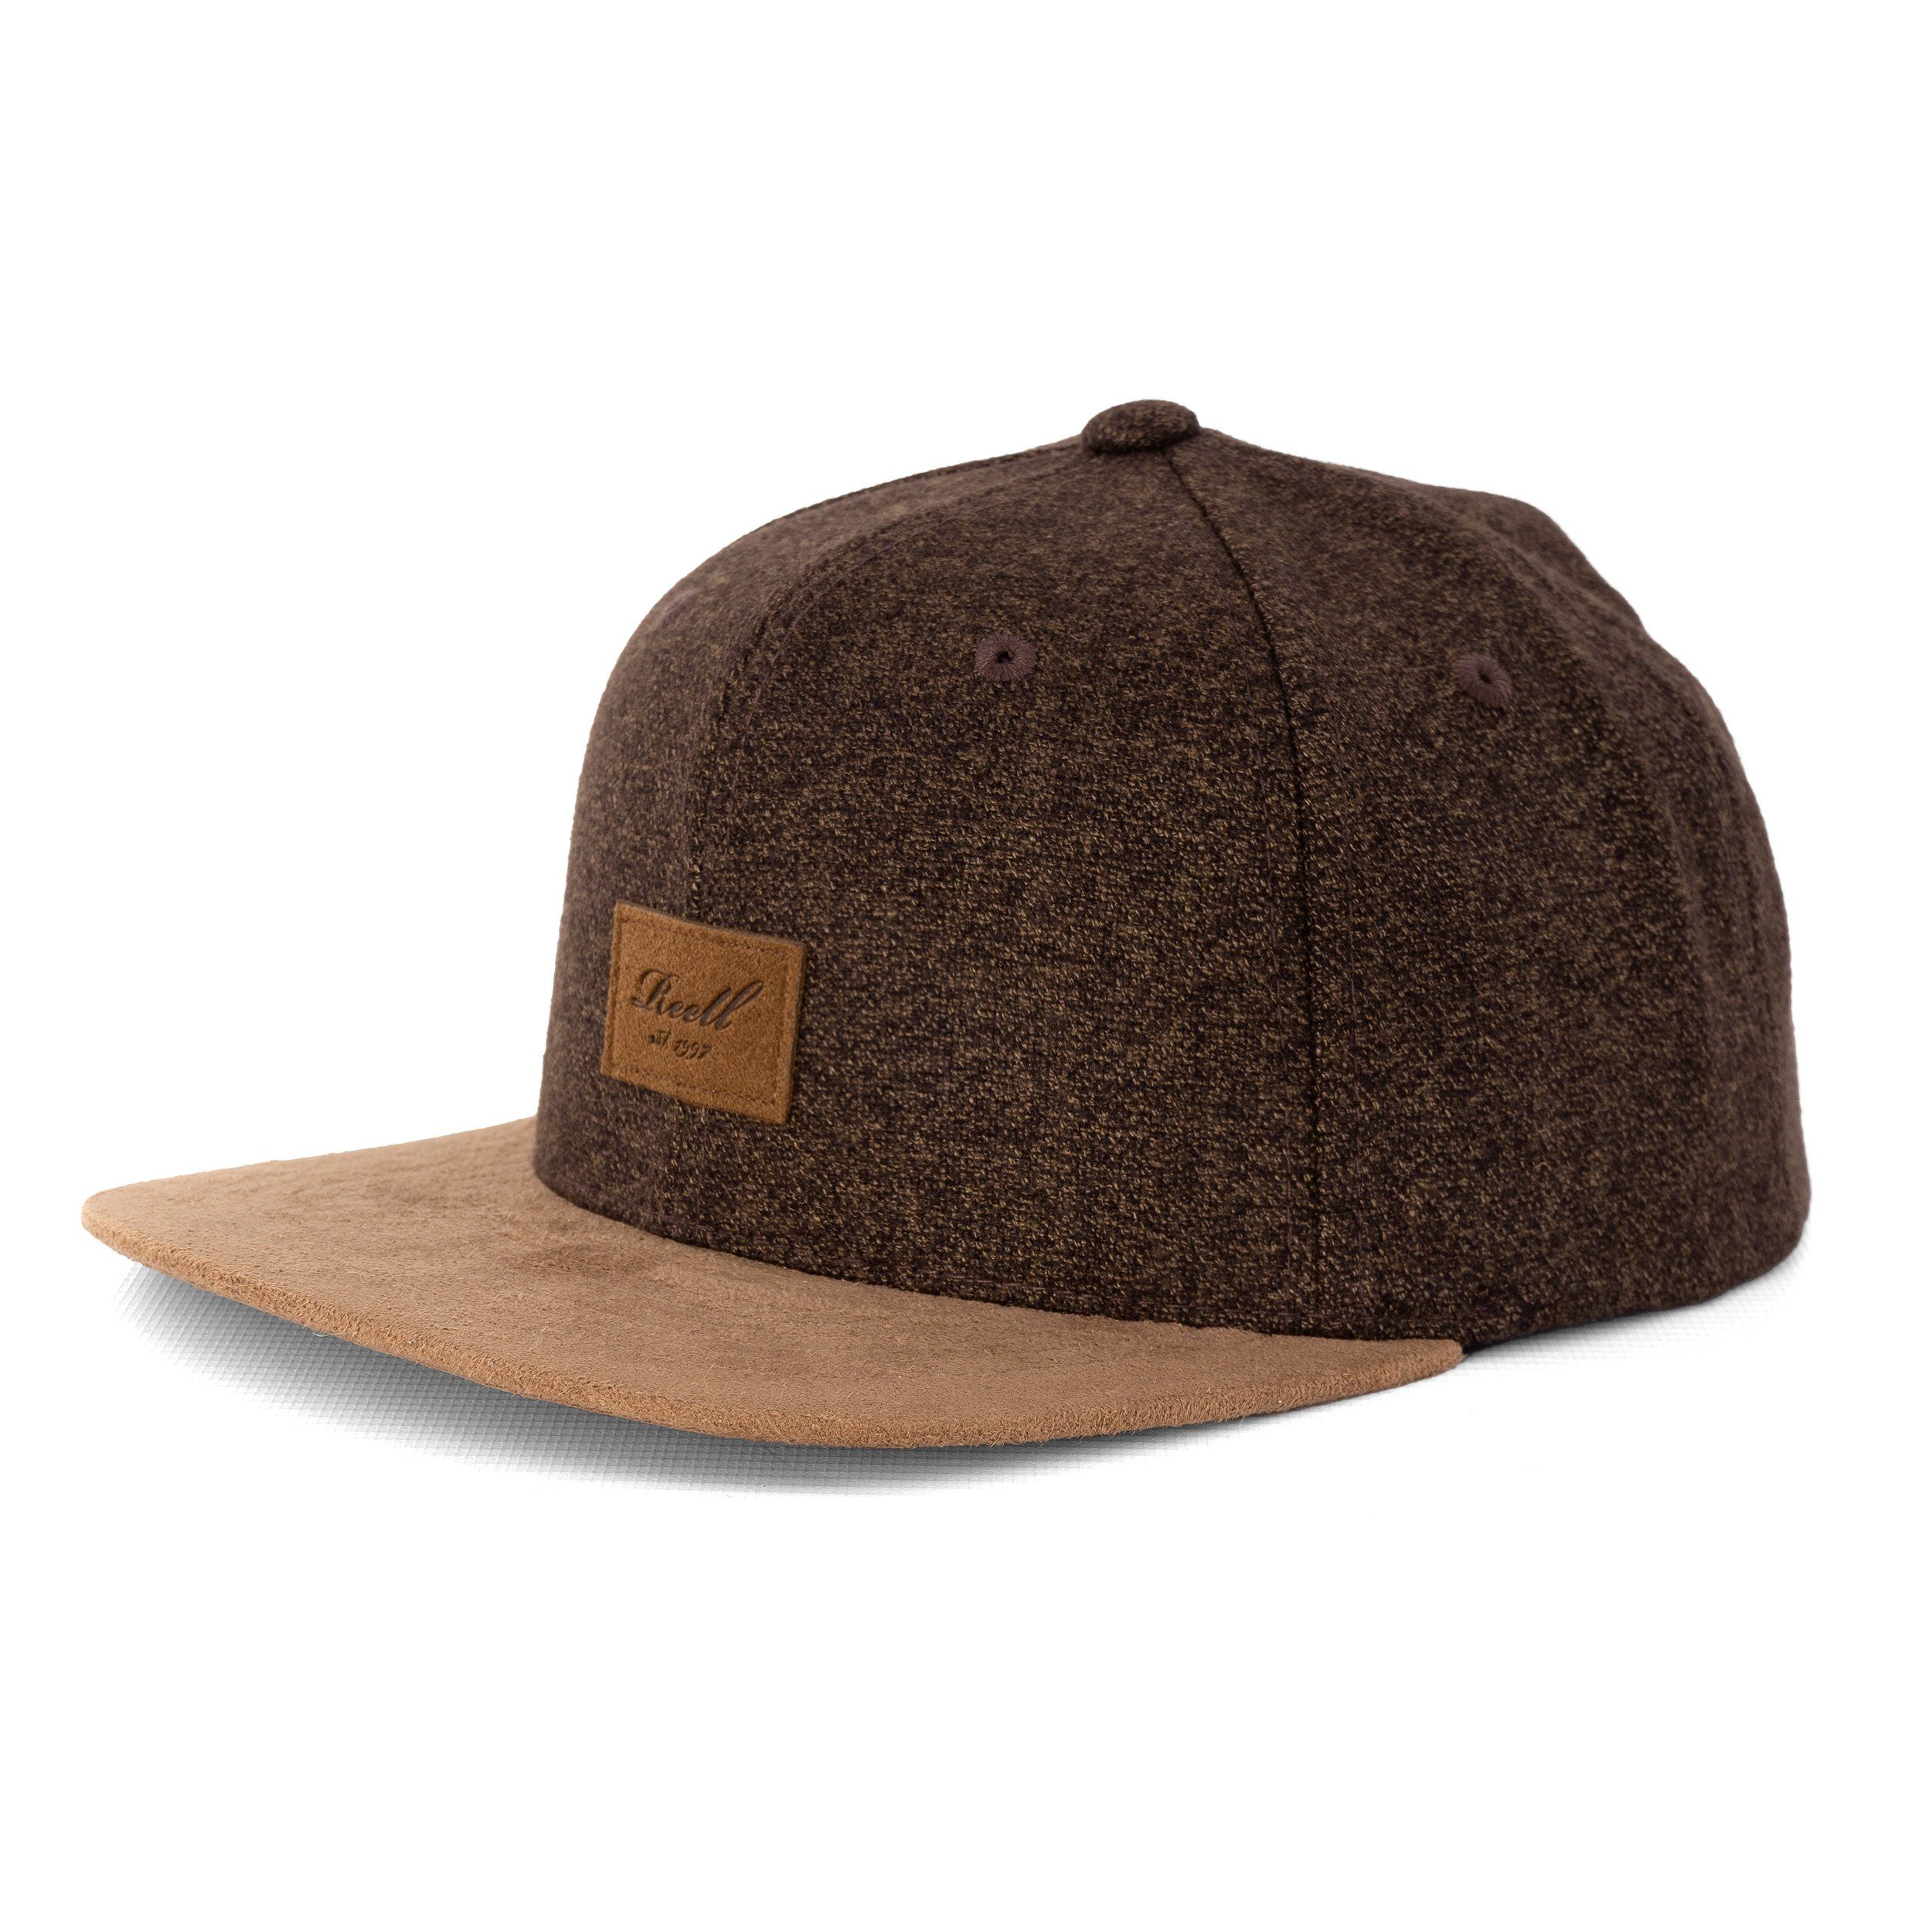 Suede Baseball REELL (1-St) Reell Cap heat.olive Cap